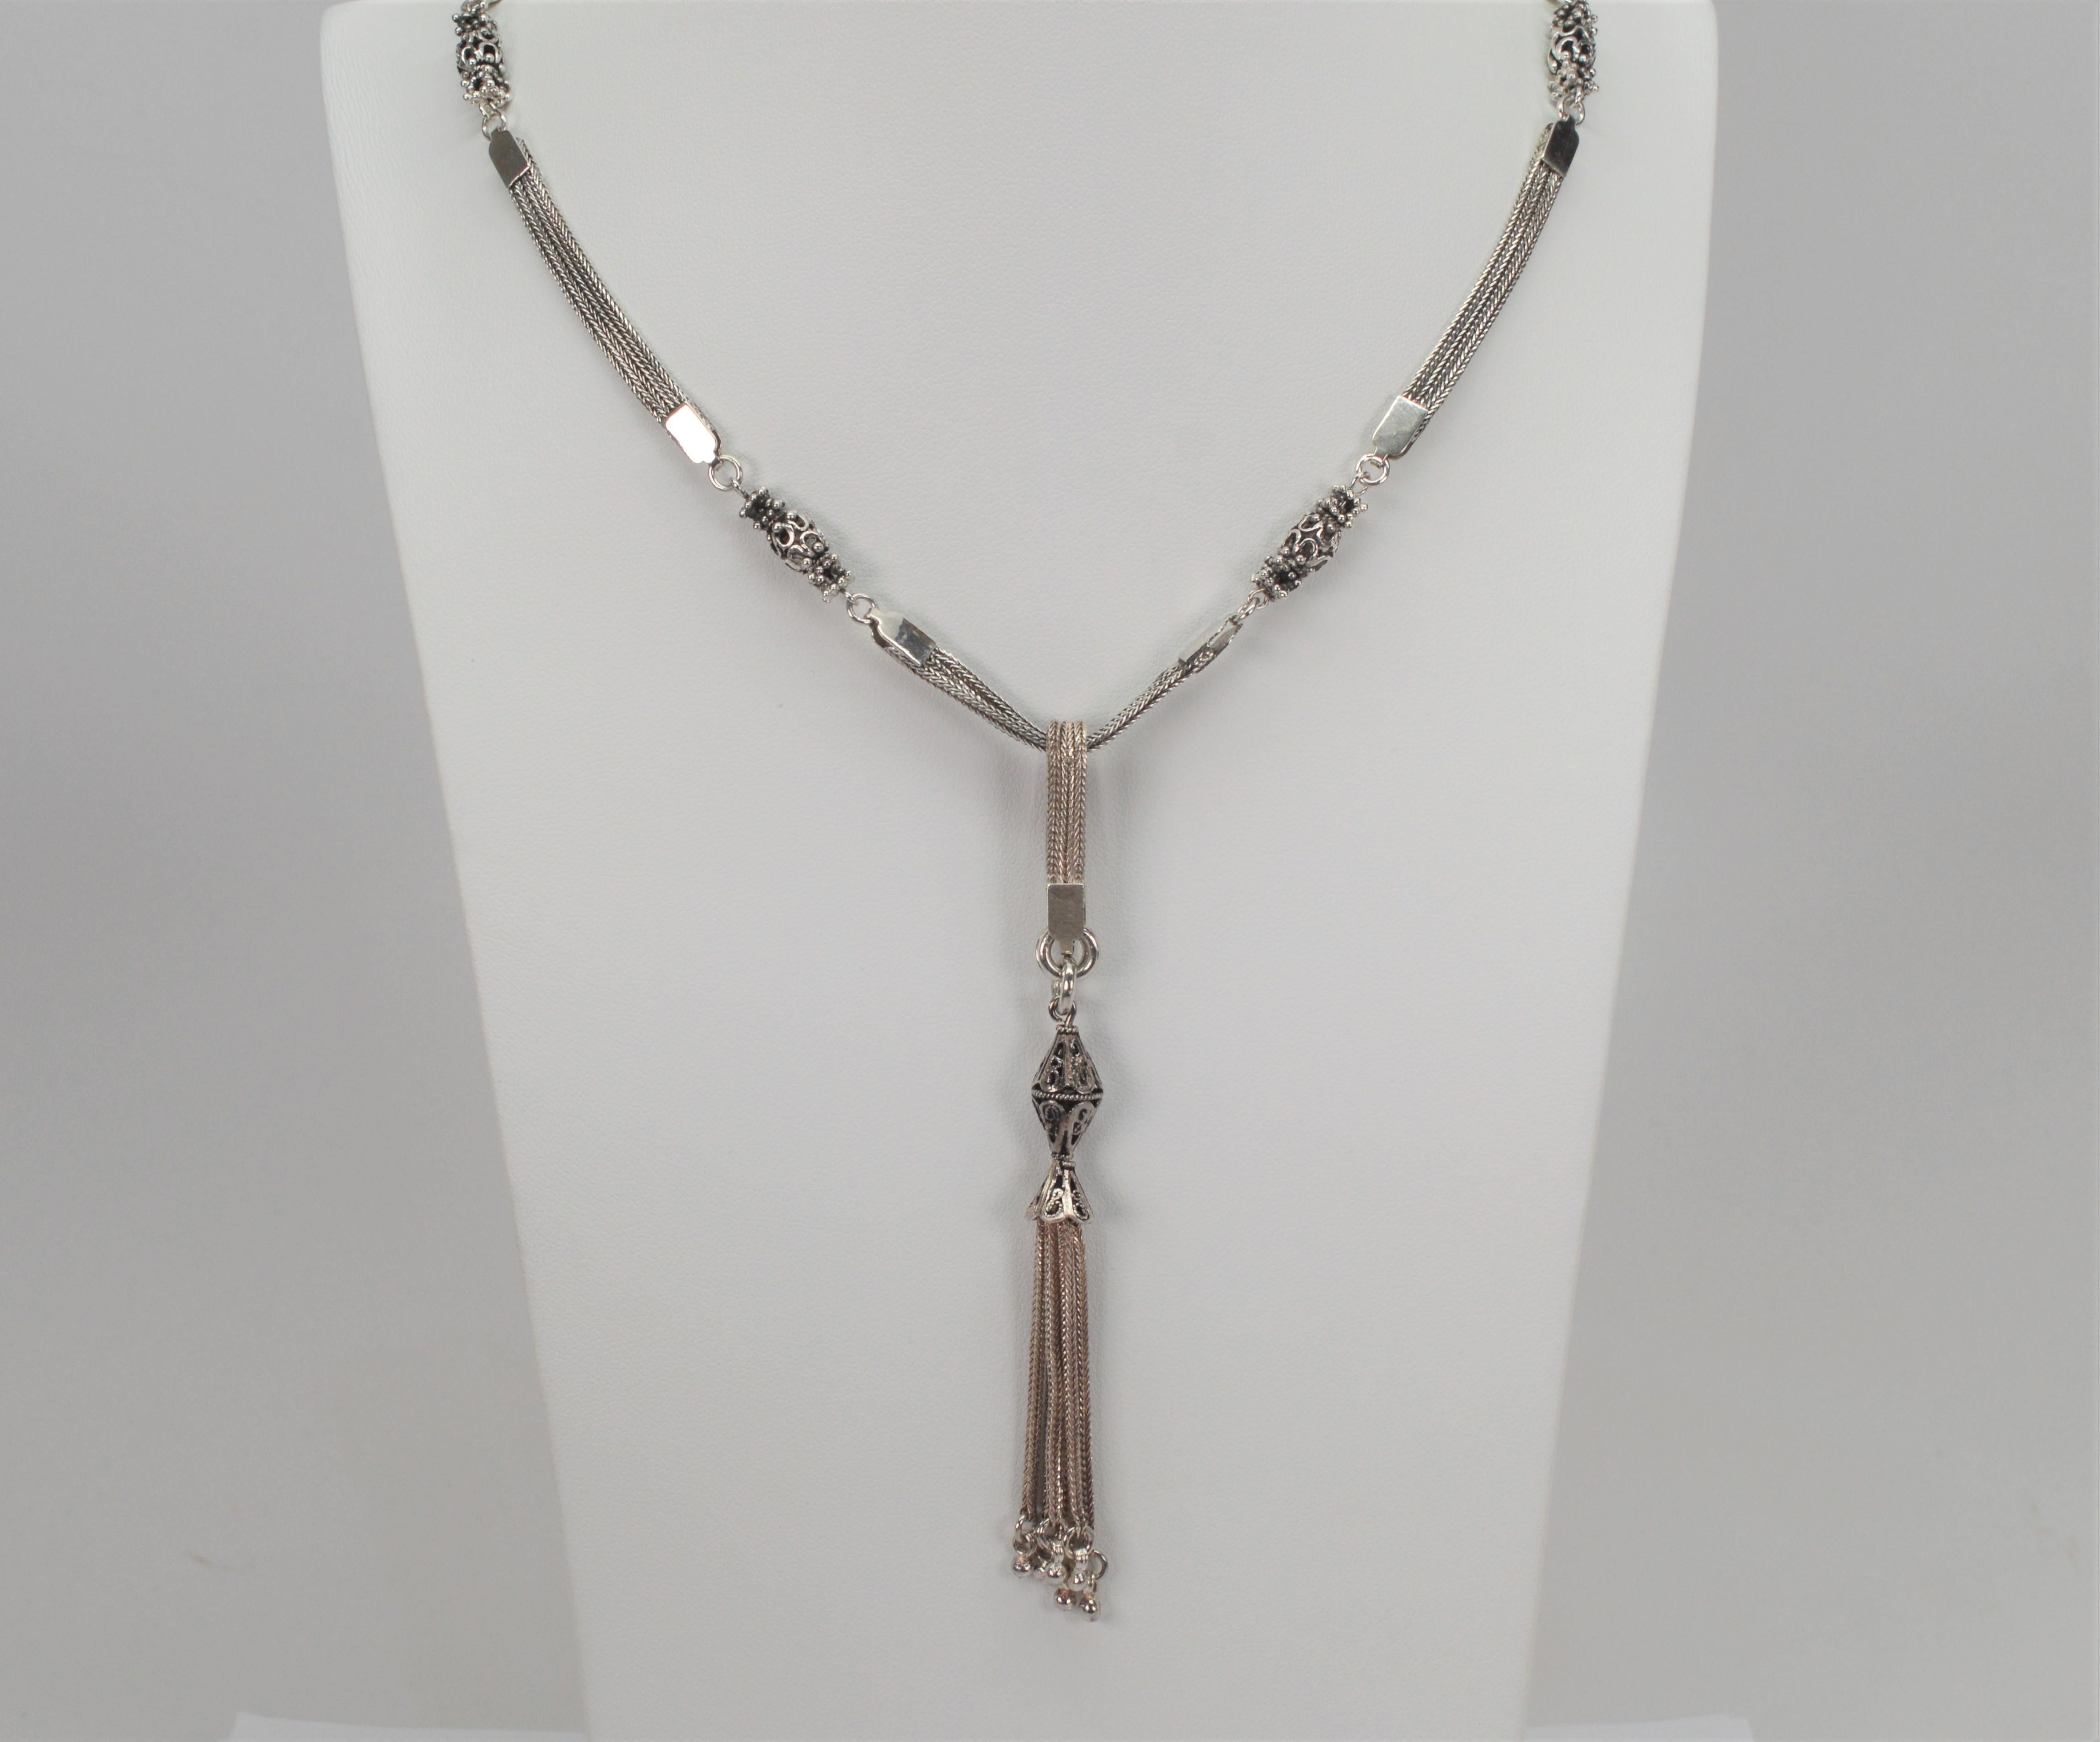 Vintage Sterling Silver Long Chain with Removable Tassel In Excellent Condition For Sale In Mount Kisco, NY